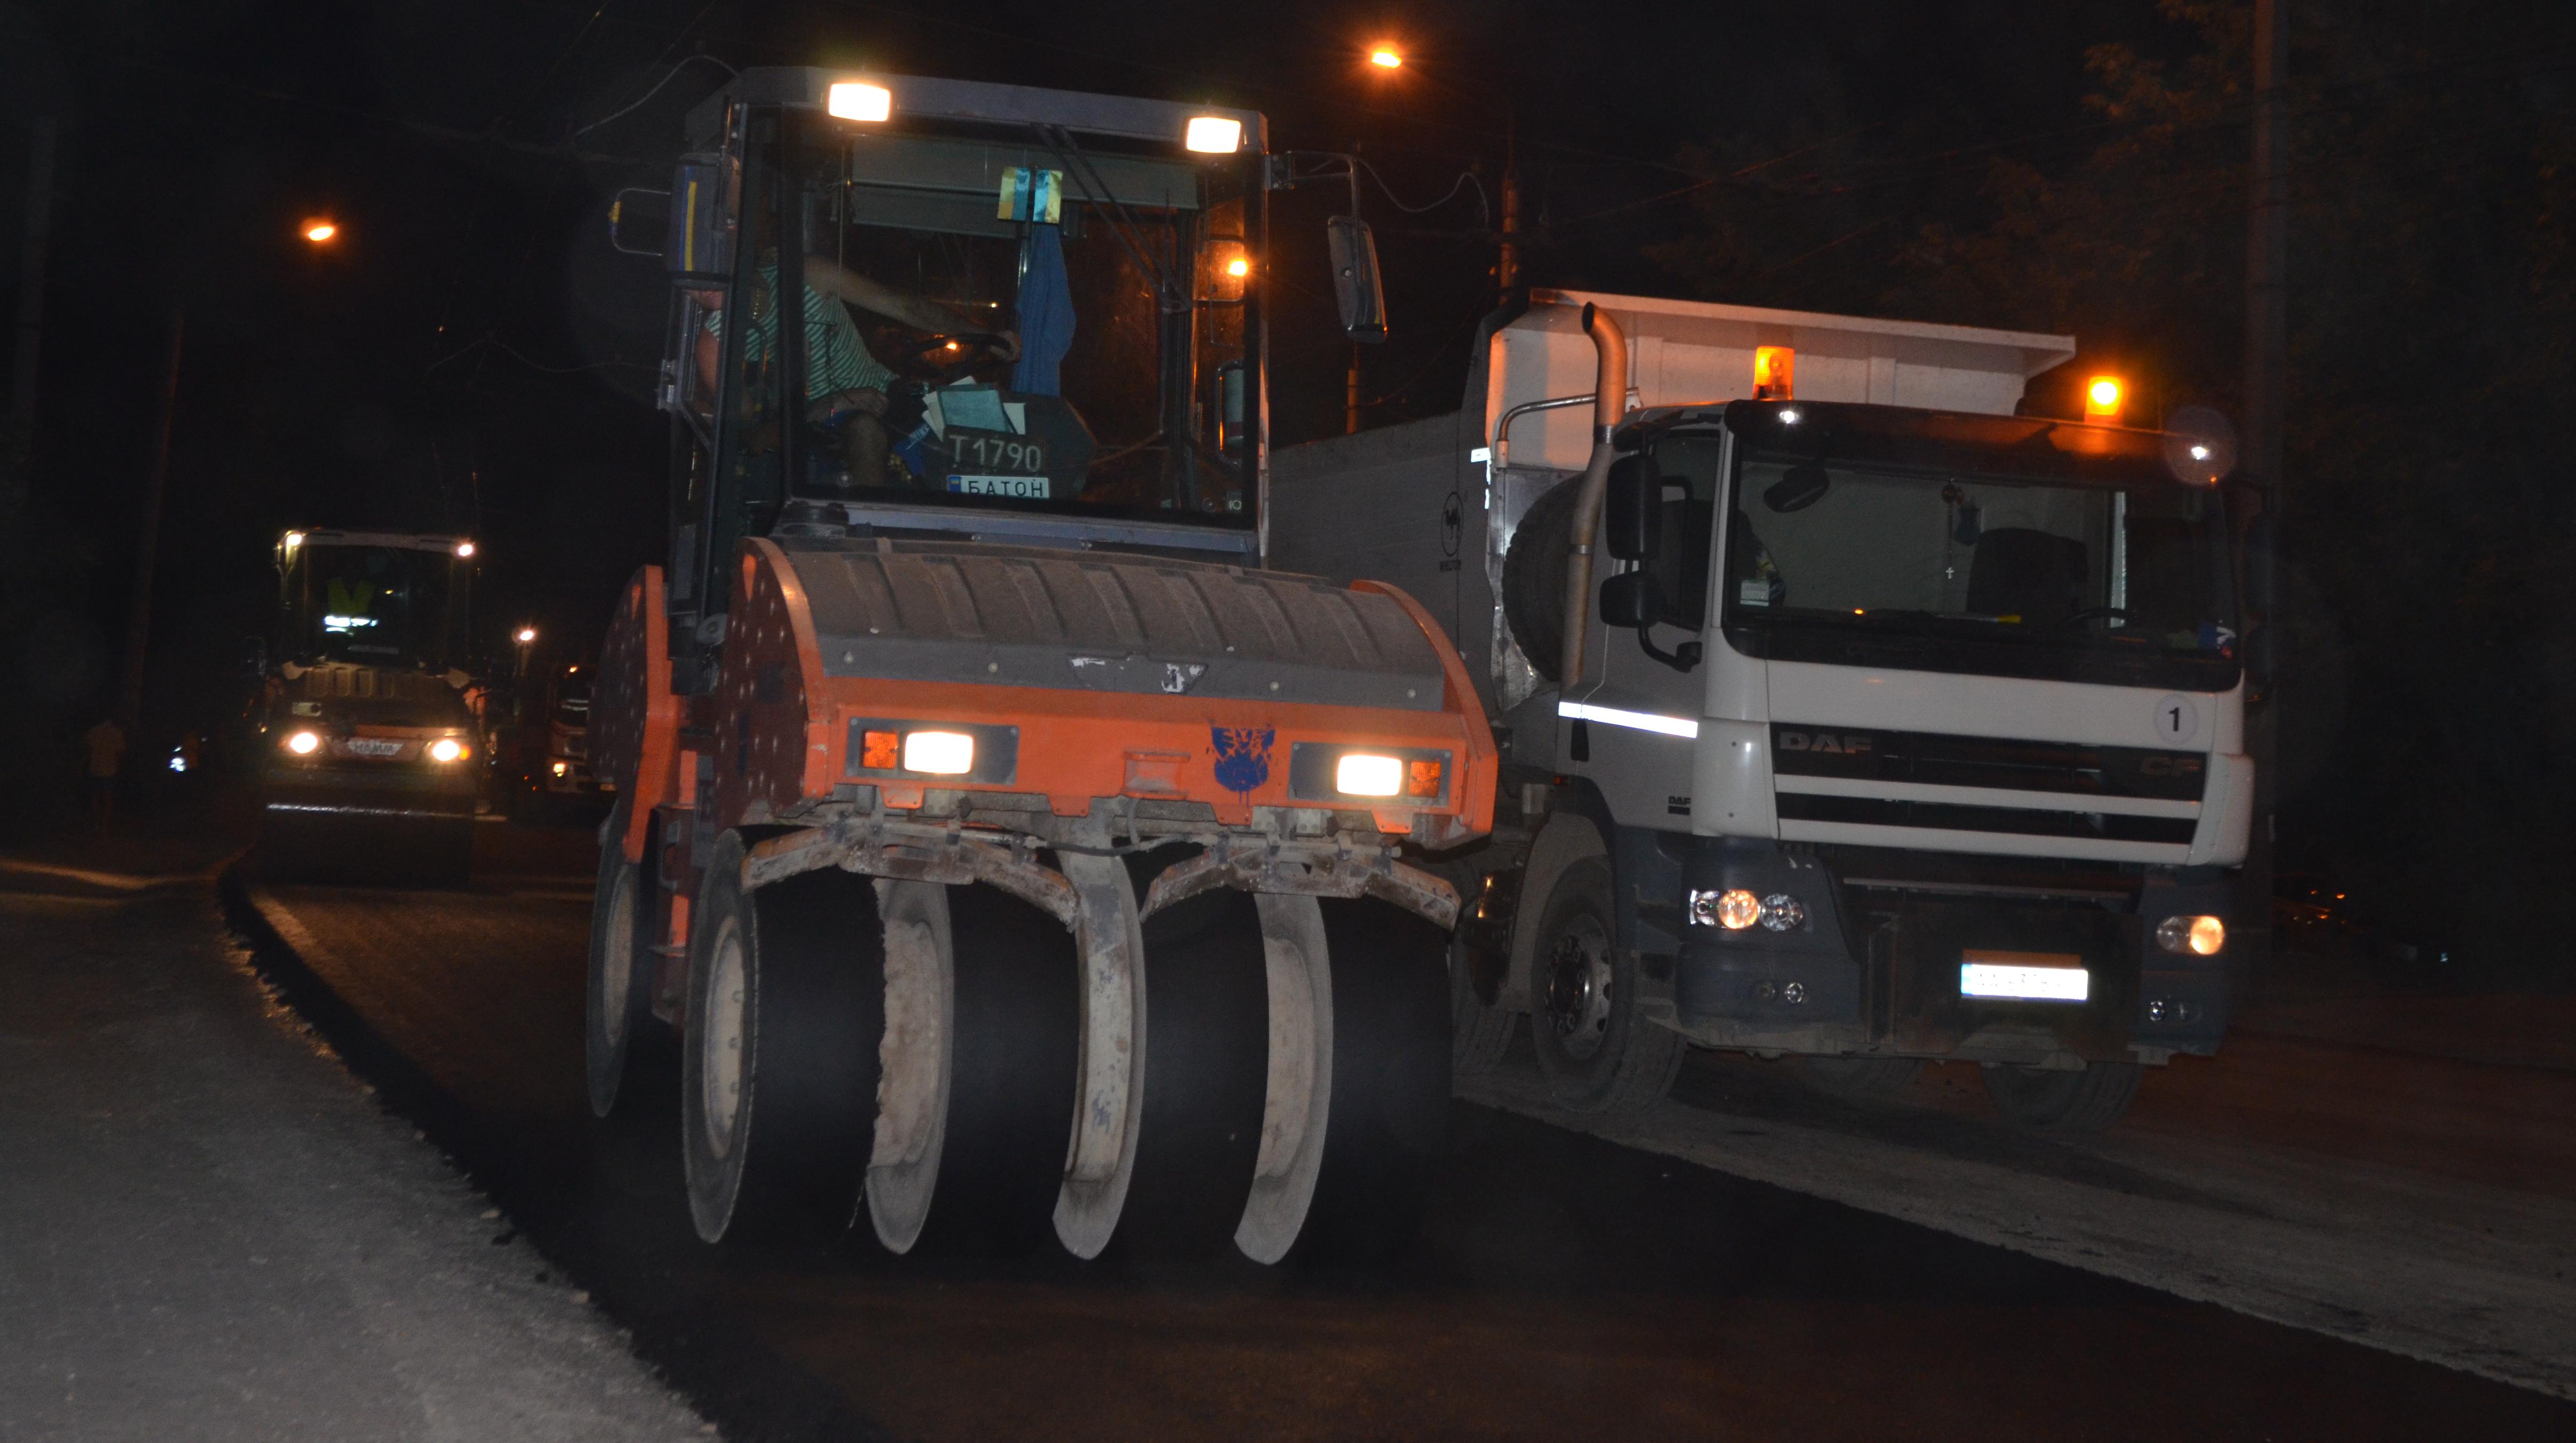 The PBS are preparing to asphalt an intersection in the town of Lutsk